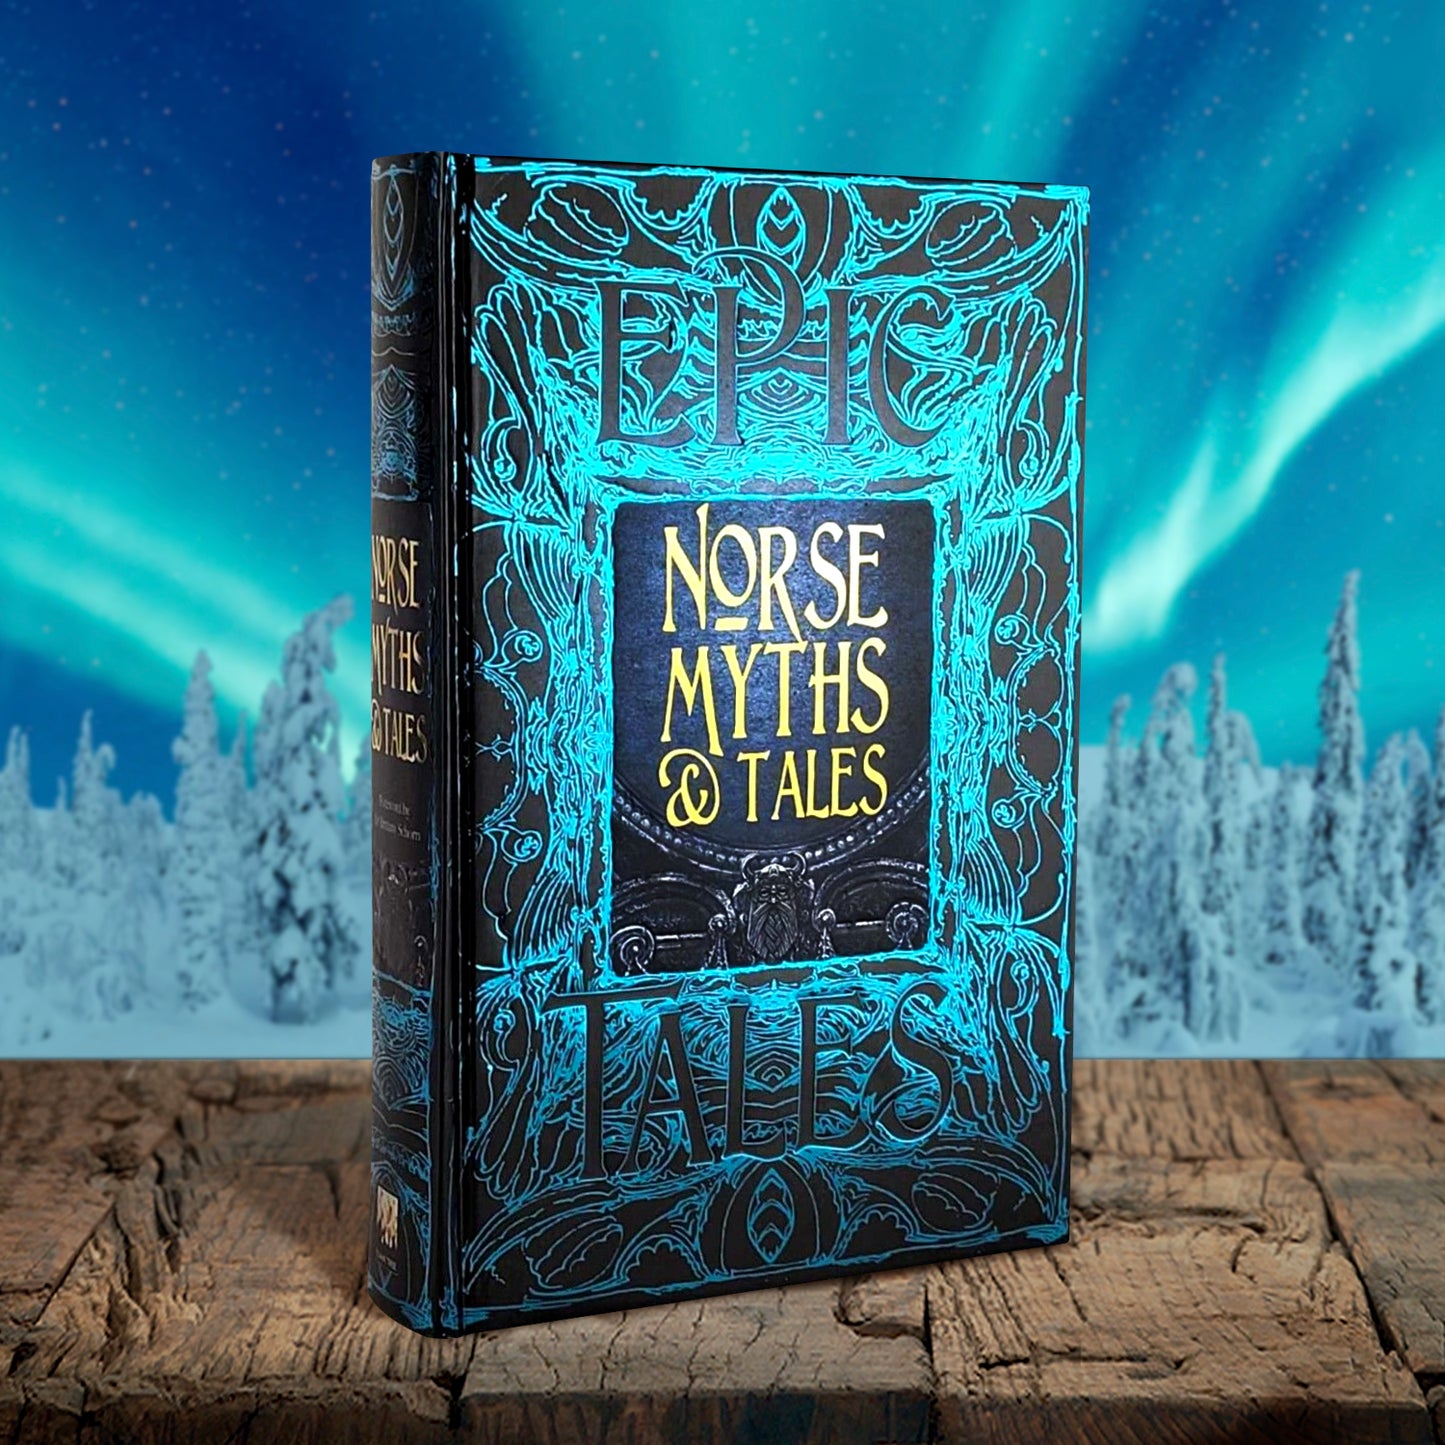 A blue book on a wood table. The background of the cover depicts blue and black patterns, similar to tree bark. At the center is a black square with yellow text saying "norse myths & tales." At the top and bottom is black text saying "epic tales." Behind the book is a winter forest with the Northern Lights visible in the sky.